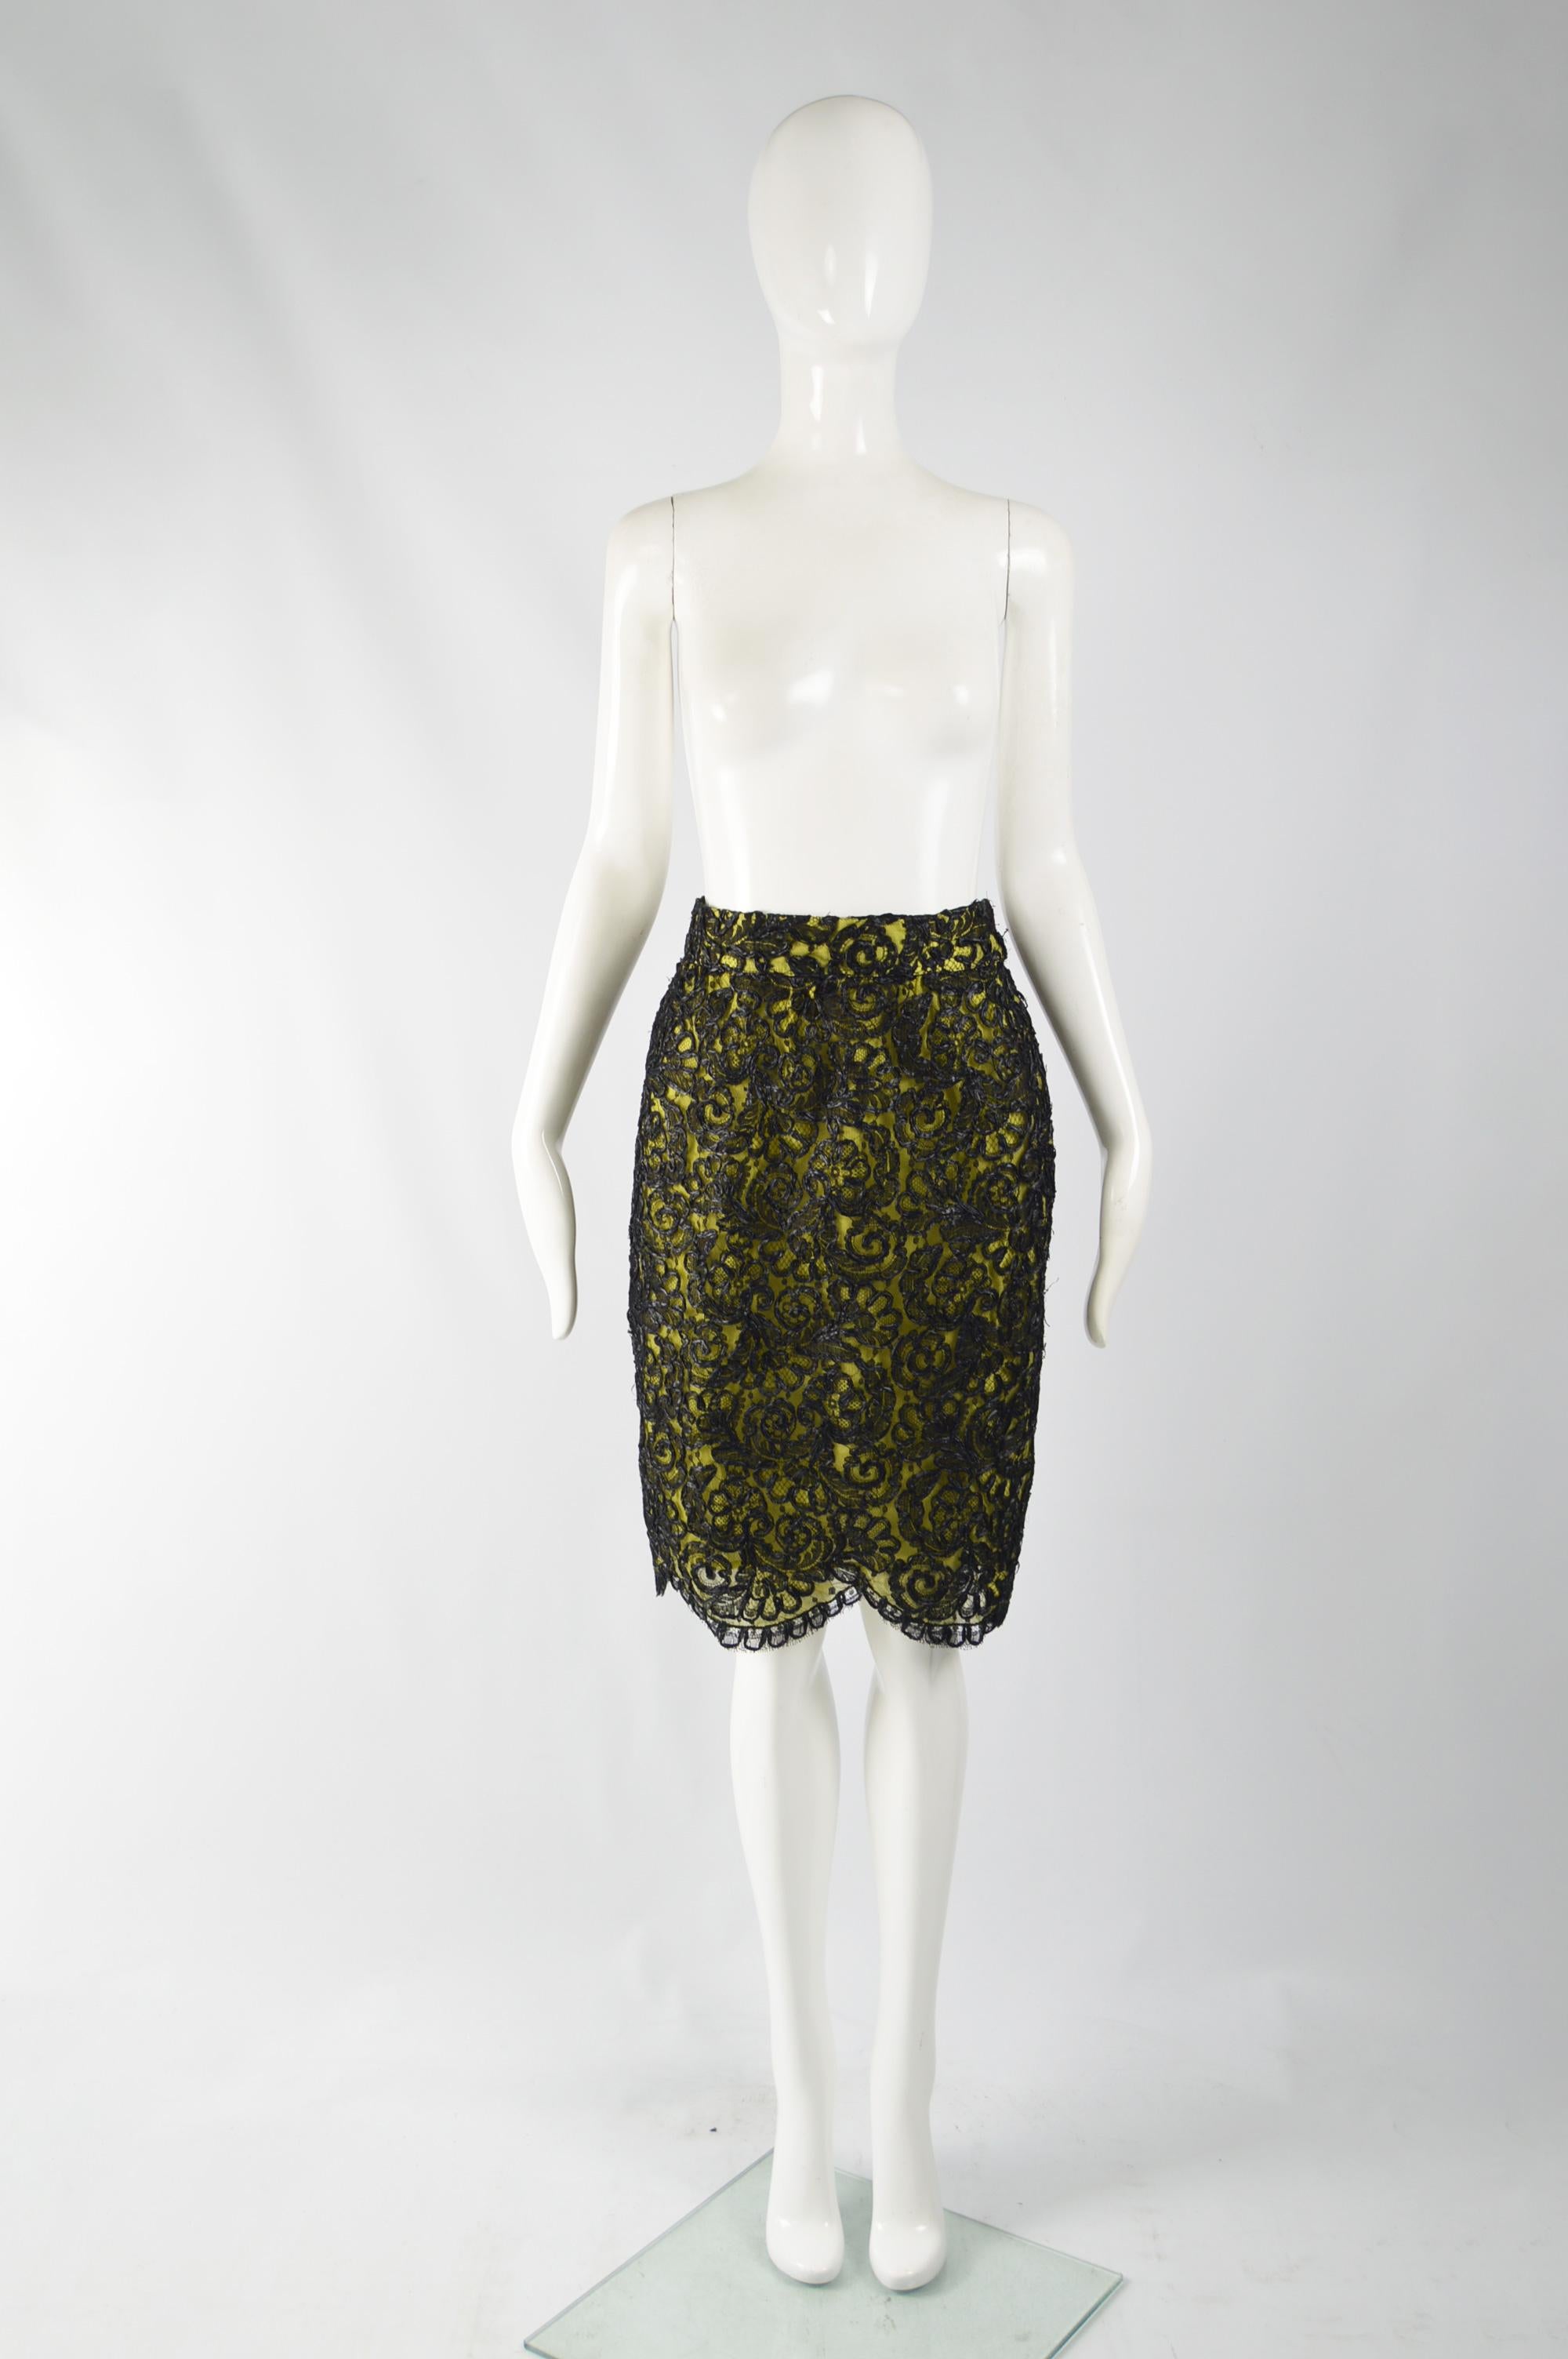 A chic vintage womens skirt from the 90s by luxury French fashion designer, Christian Lacroix. In a lime green fabric with a lace overlay and black raffia creating an intricate pattern, perfect for the evening or at a party. 

Size: Marked vintage I